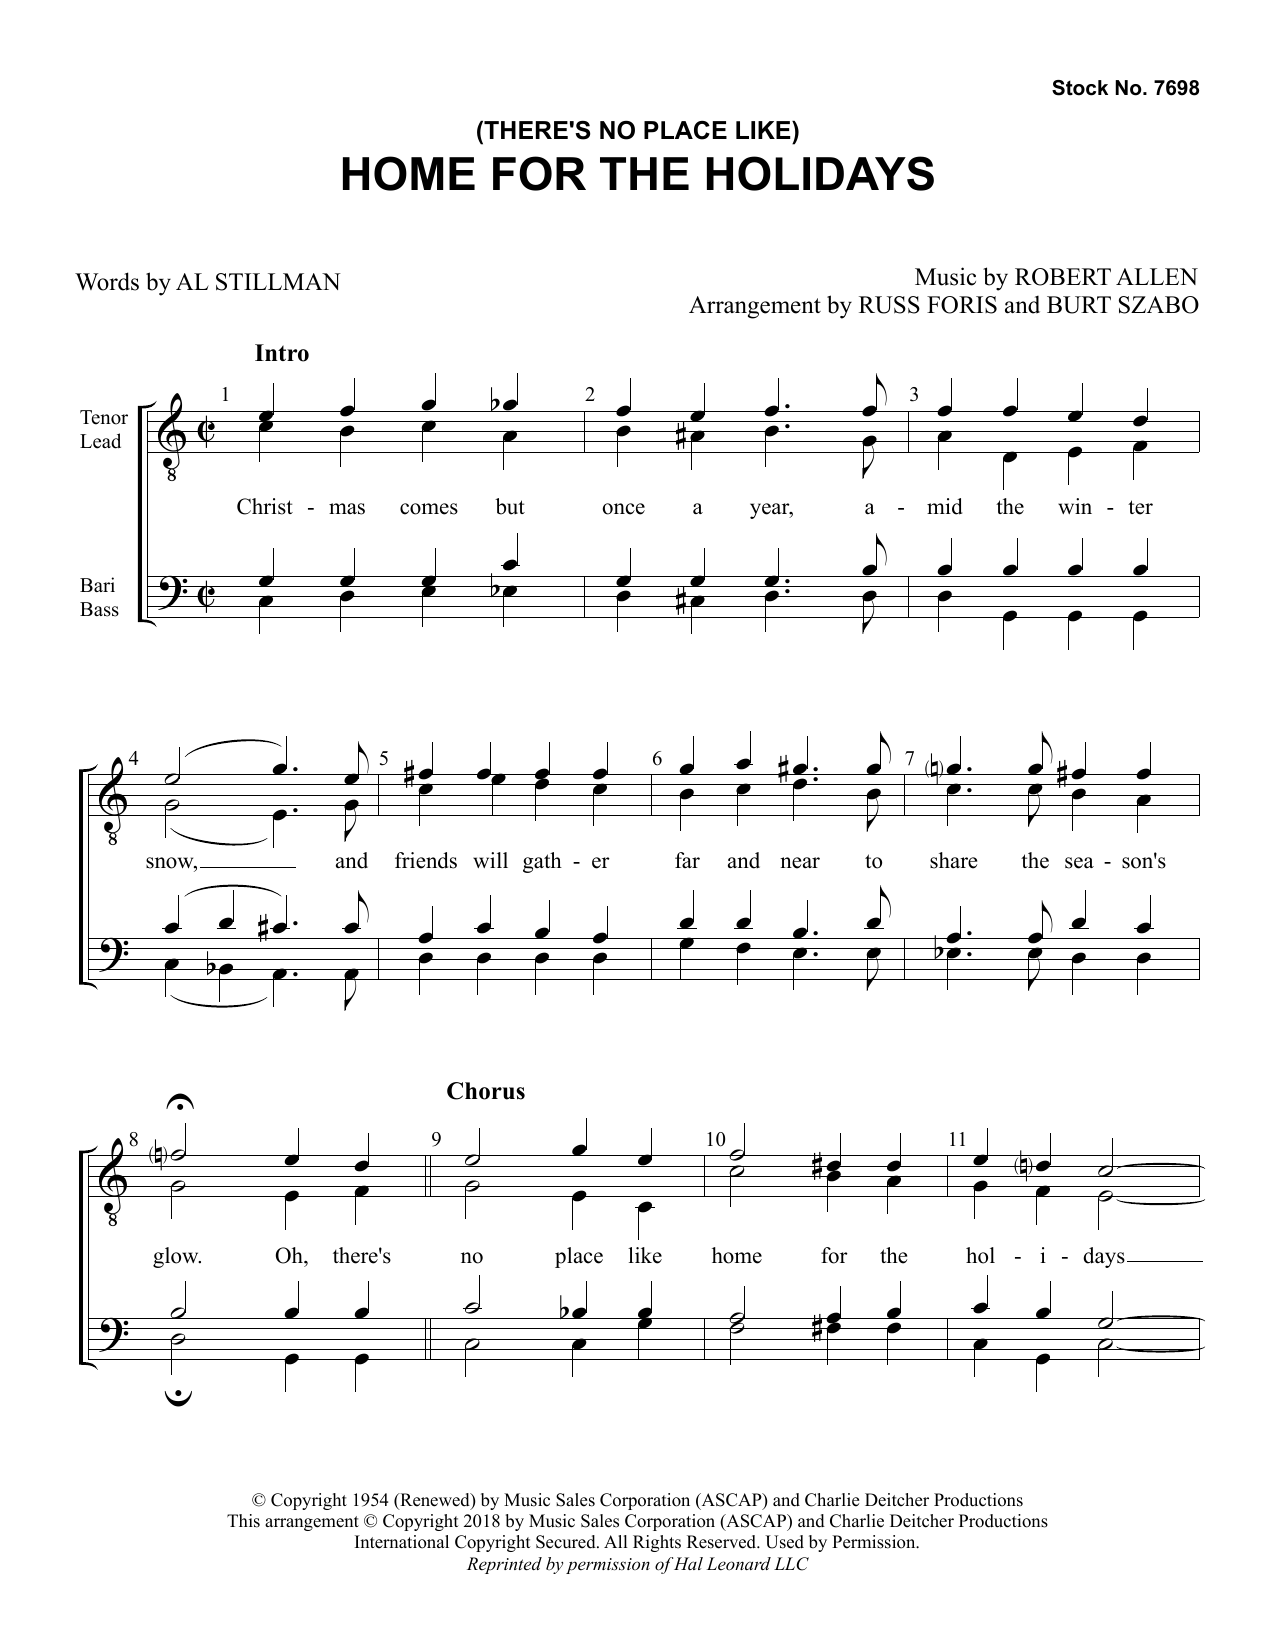 Al Stillman & Robert Allen (There's No Place Like) Home for the Holidays (arr. Russ Foris & Burt Szabo) sheet music notes and chords. Download Printable PDF.